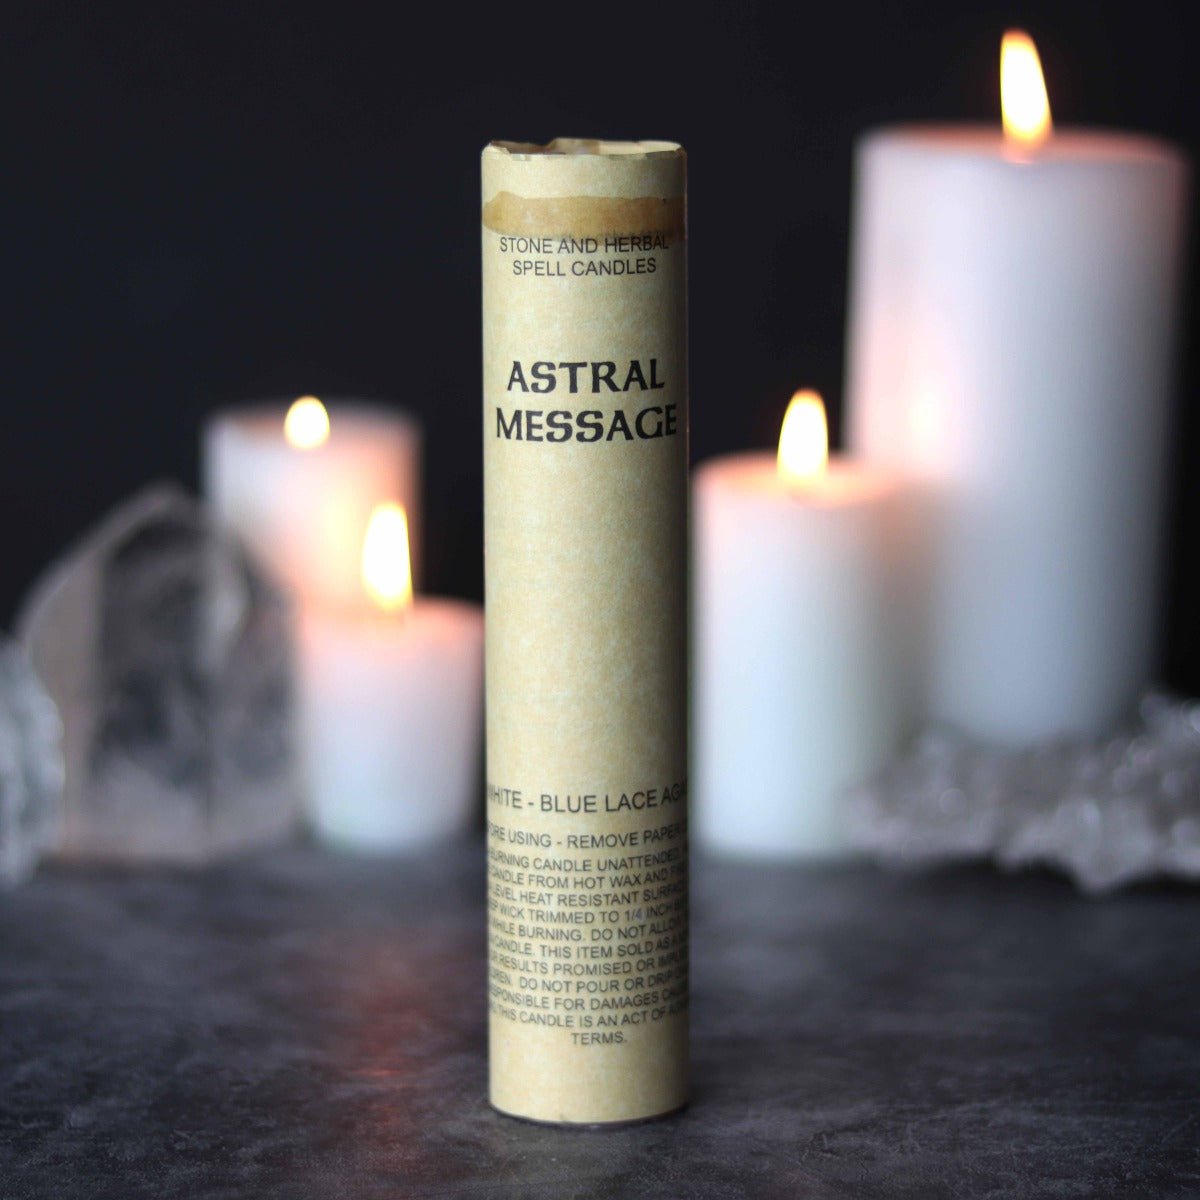 Astral Message Spell Candle - 13 Moons